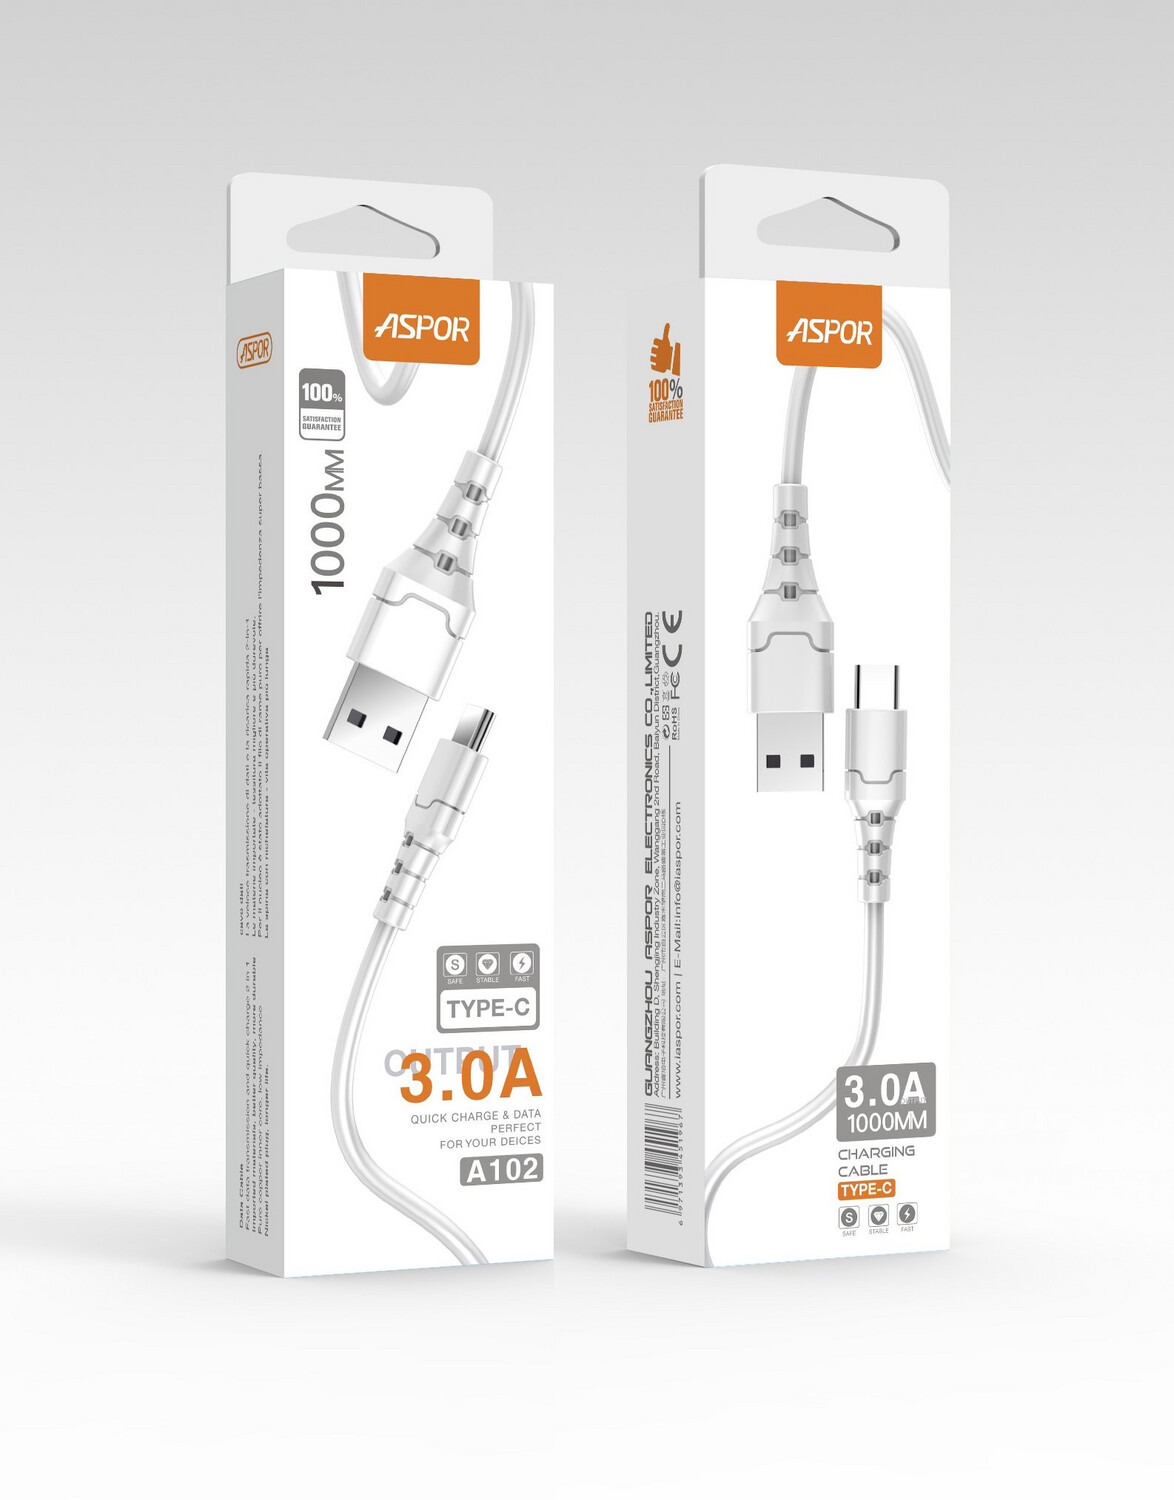 aspor cable 1m quick charge for all phone 6 month warranty